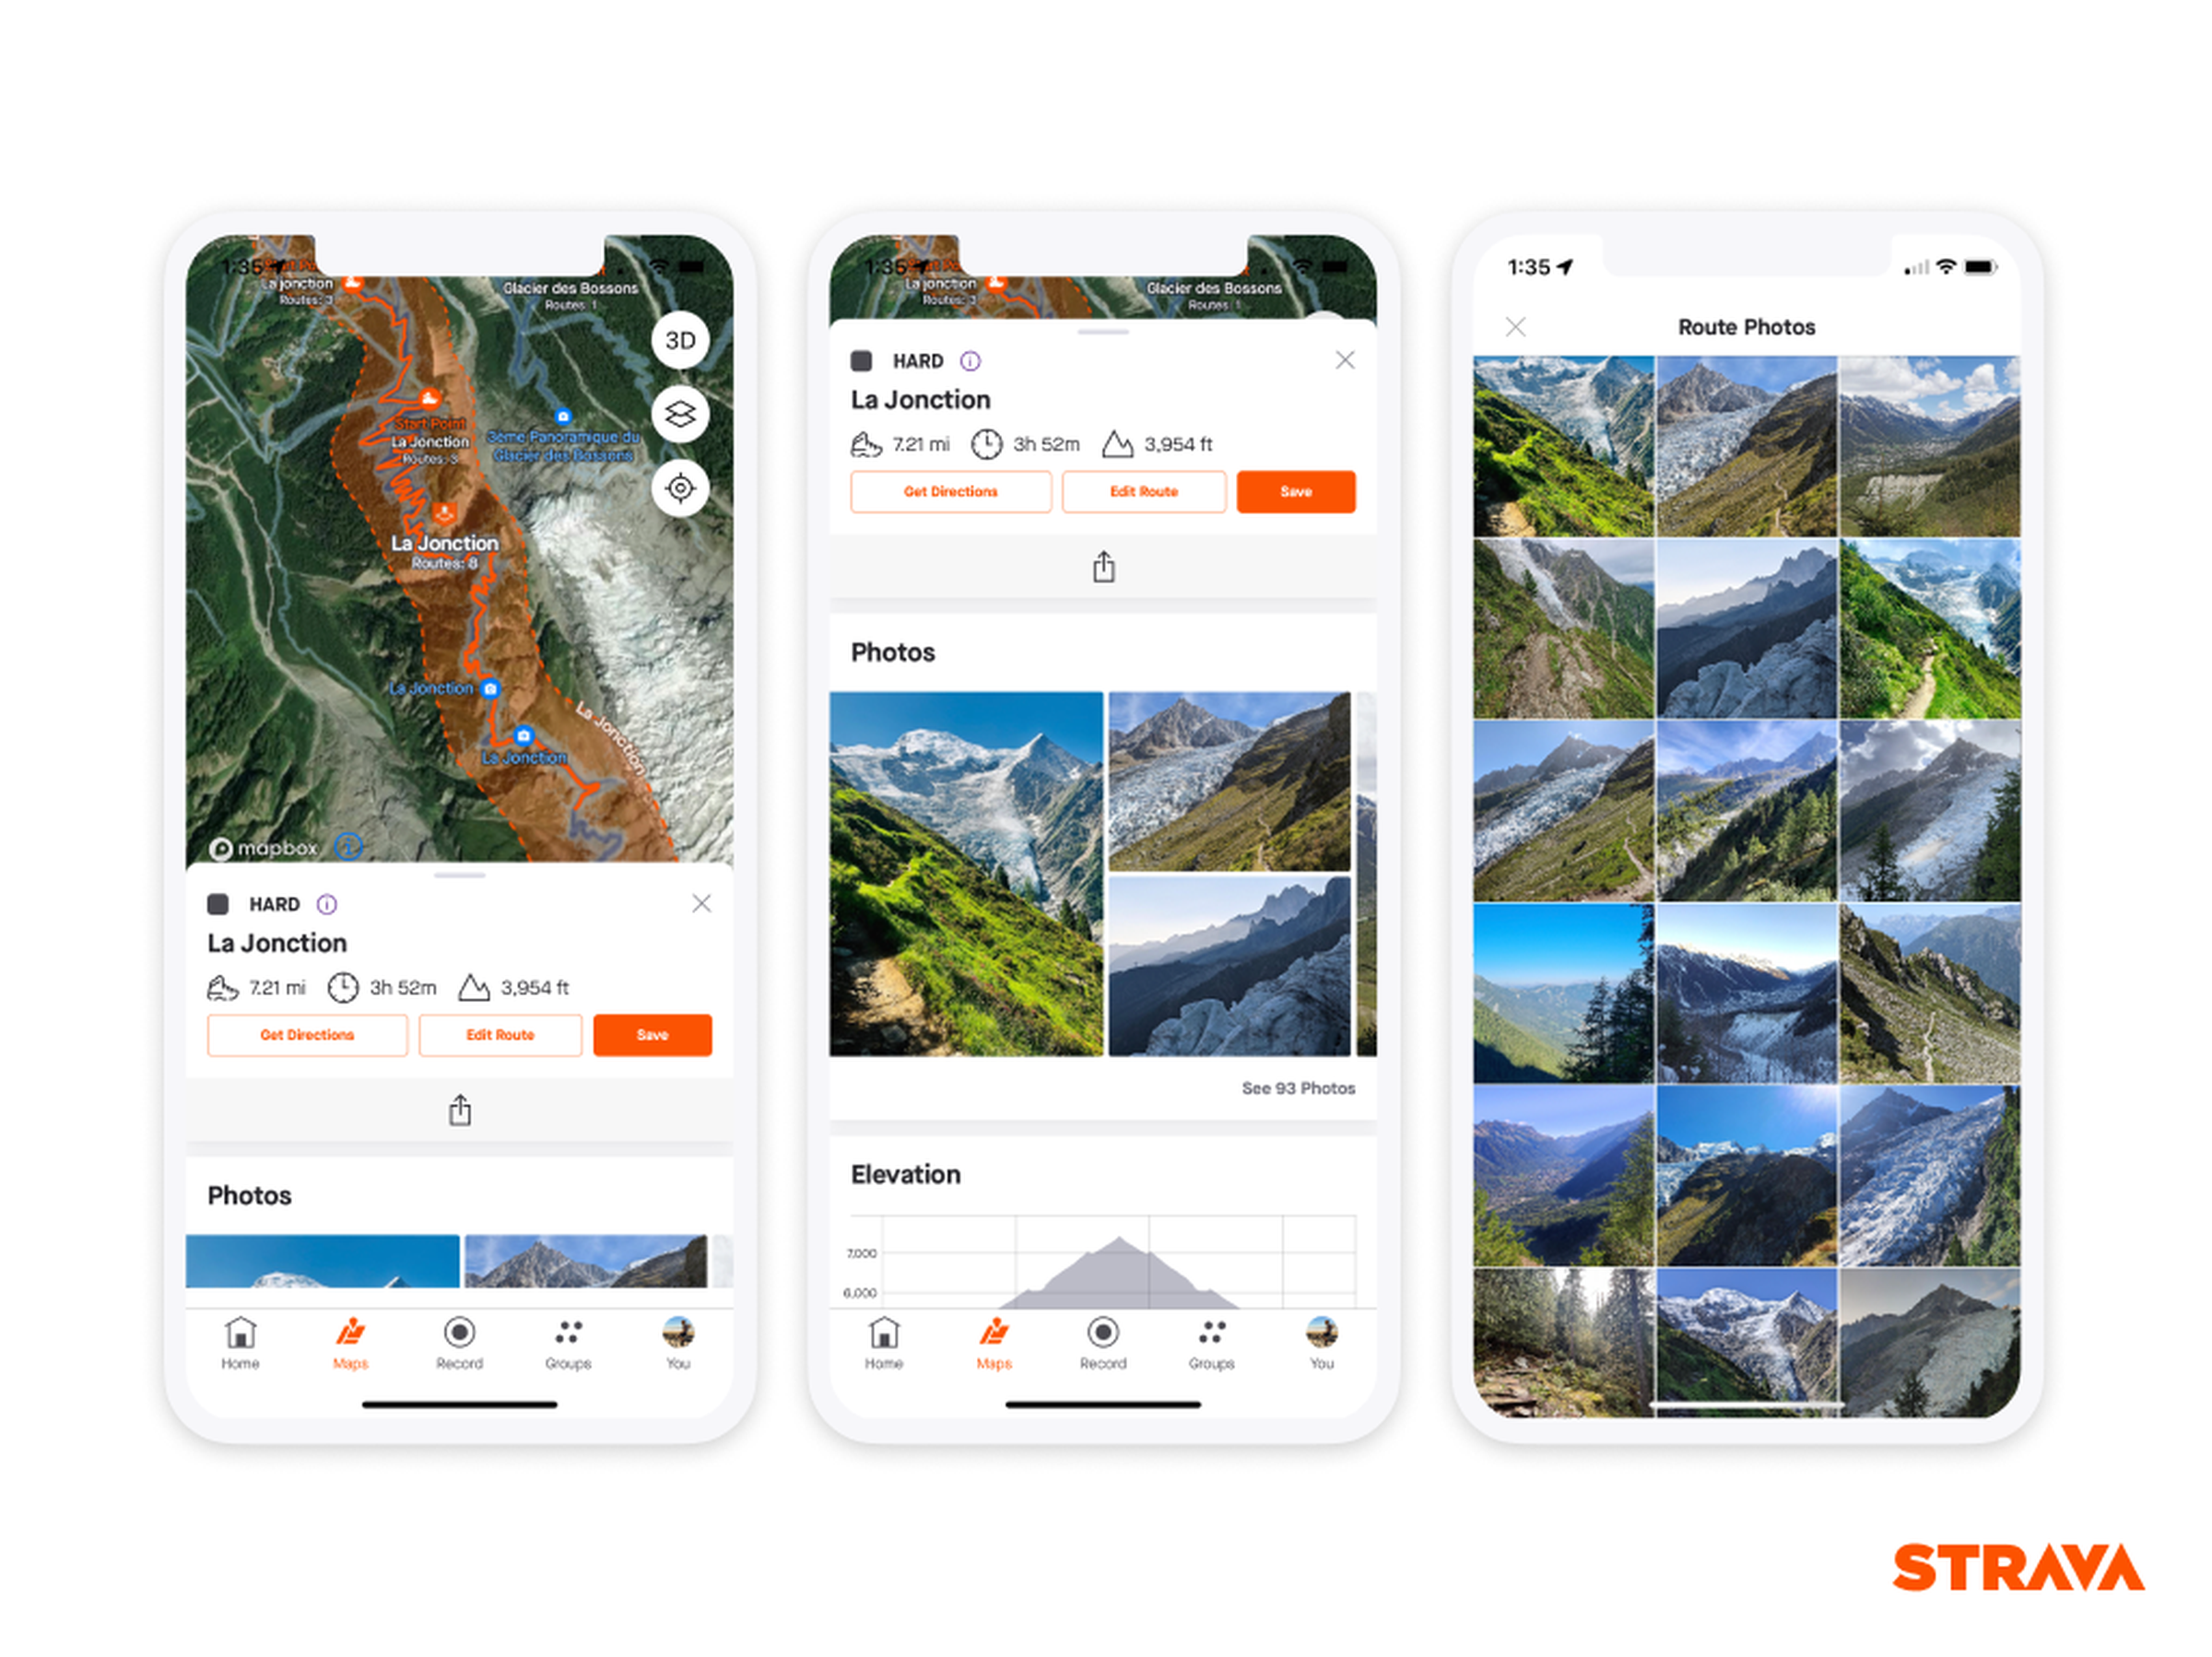 Strava render showing three different views of the photos shown in the recommended routes feature.